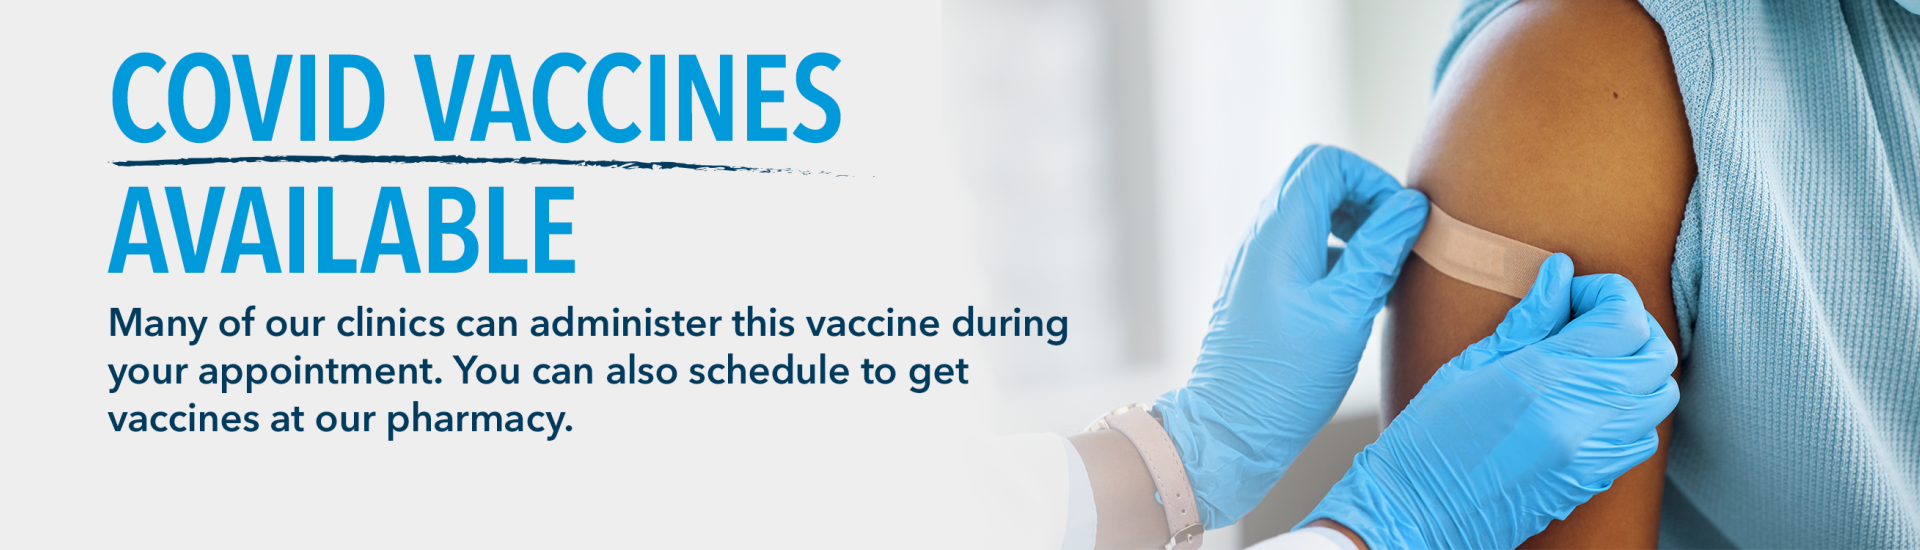 COVID Vaccines Available